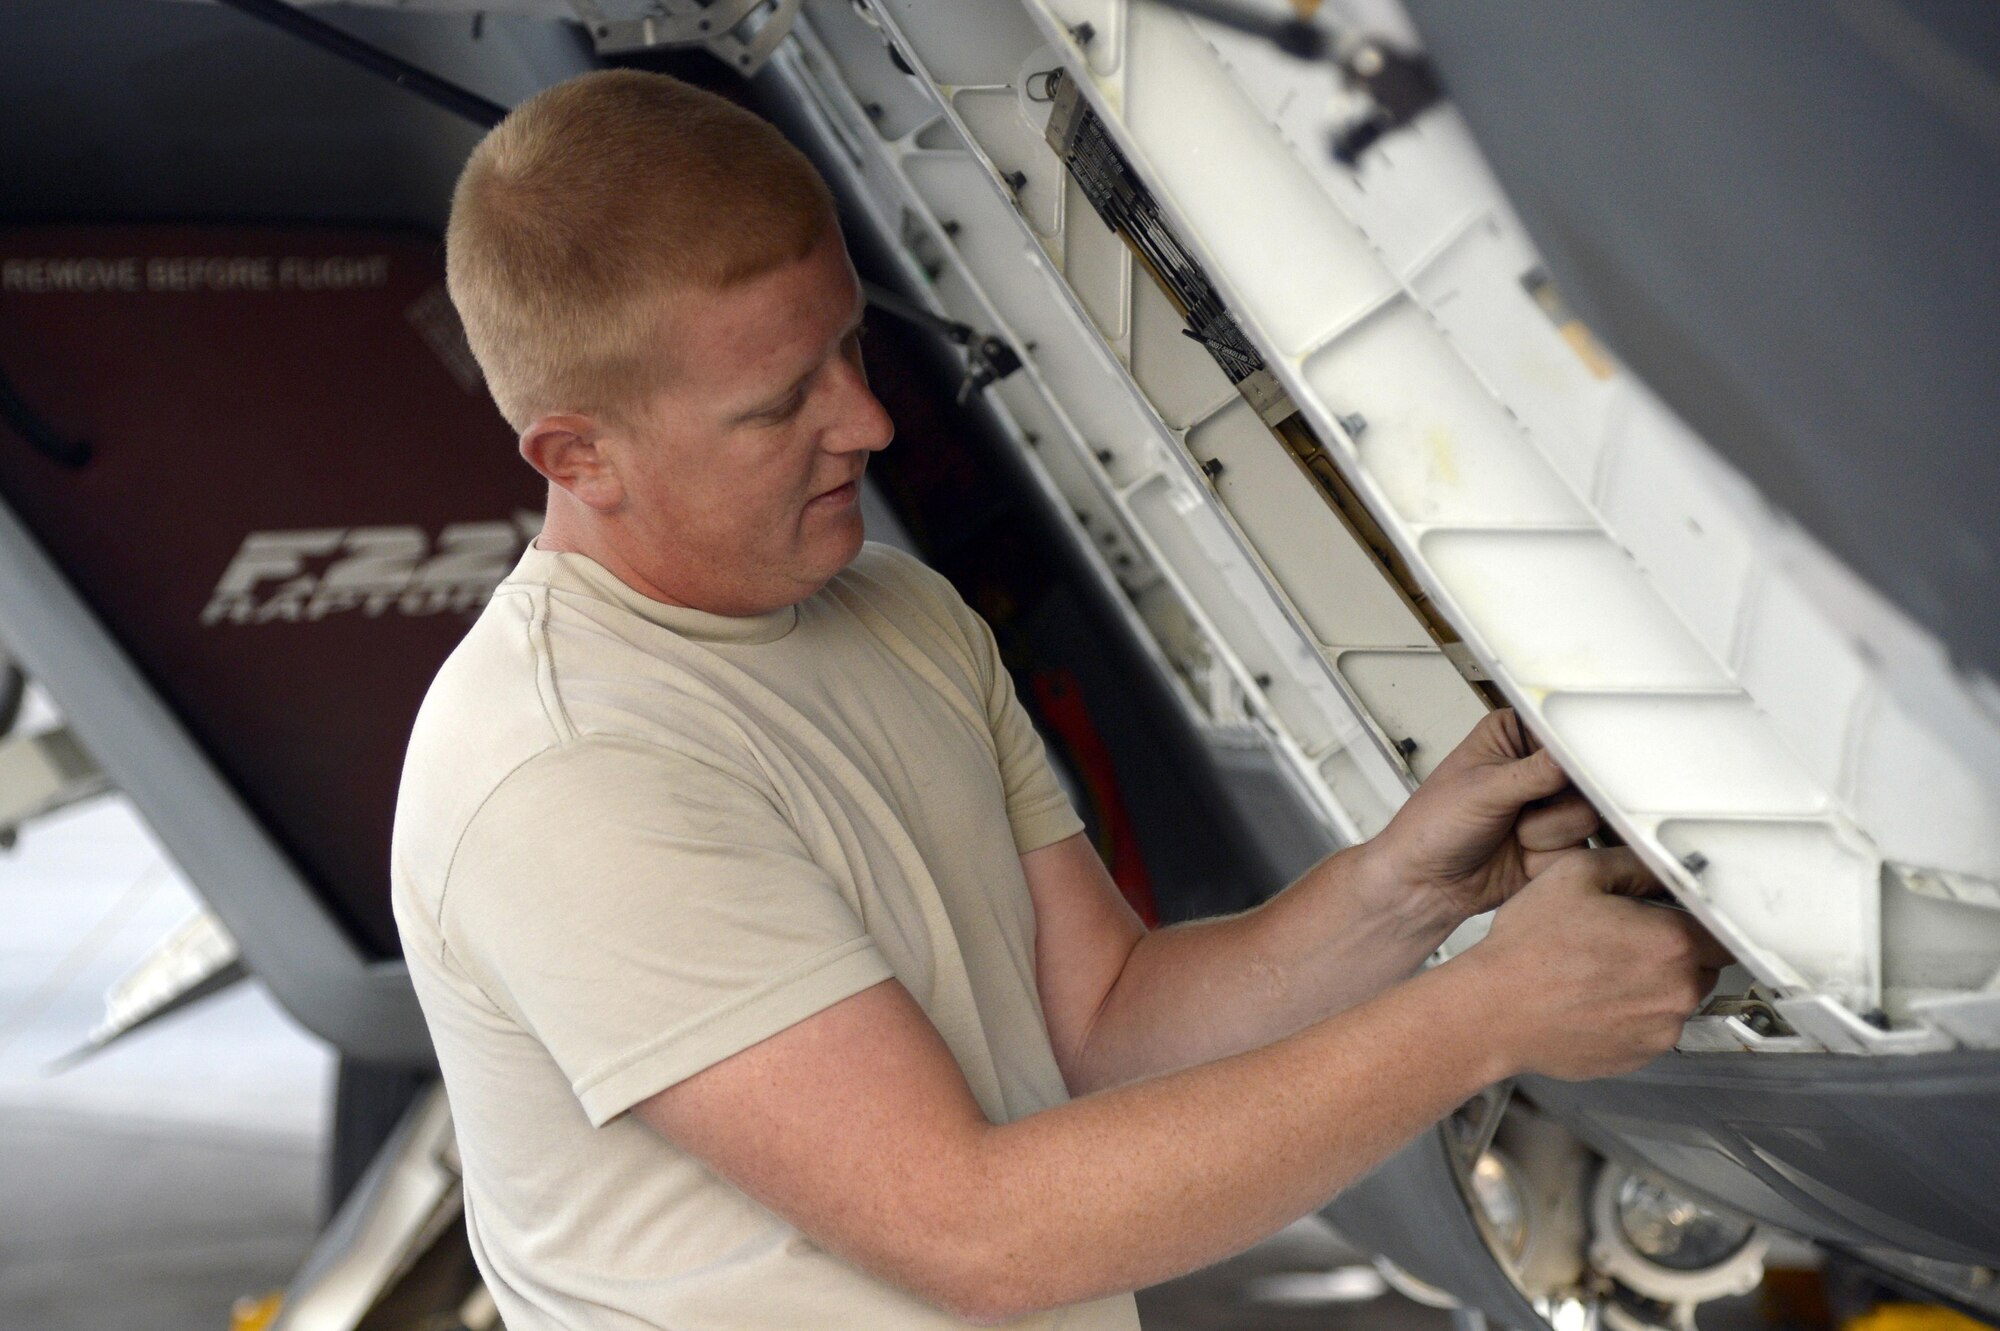 Staff Sgt. James, avionics craftsman, troubleshoots a communications, navigation and identification system on an F-22 Raptor at an undisclosed location in Southwest Asia Jan. 26, 2015. The F-22's CNI 'system' is a collection of communication, navigation and identification functions, employing a common integrated processor for signal and data processing resources. James is currently deployed from Tyndall Air Force Base, Fla., and is a native of Frackville, Pa. (U.S. Air Force/Tech. Sgt. Marie Brown)